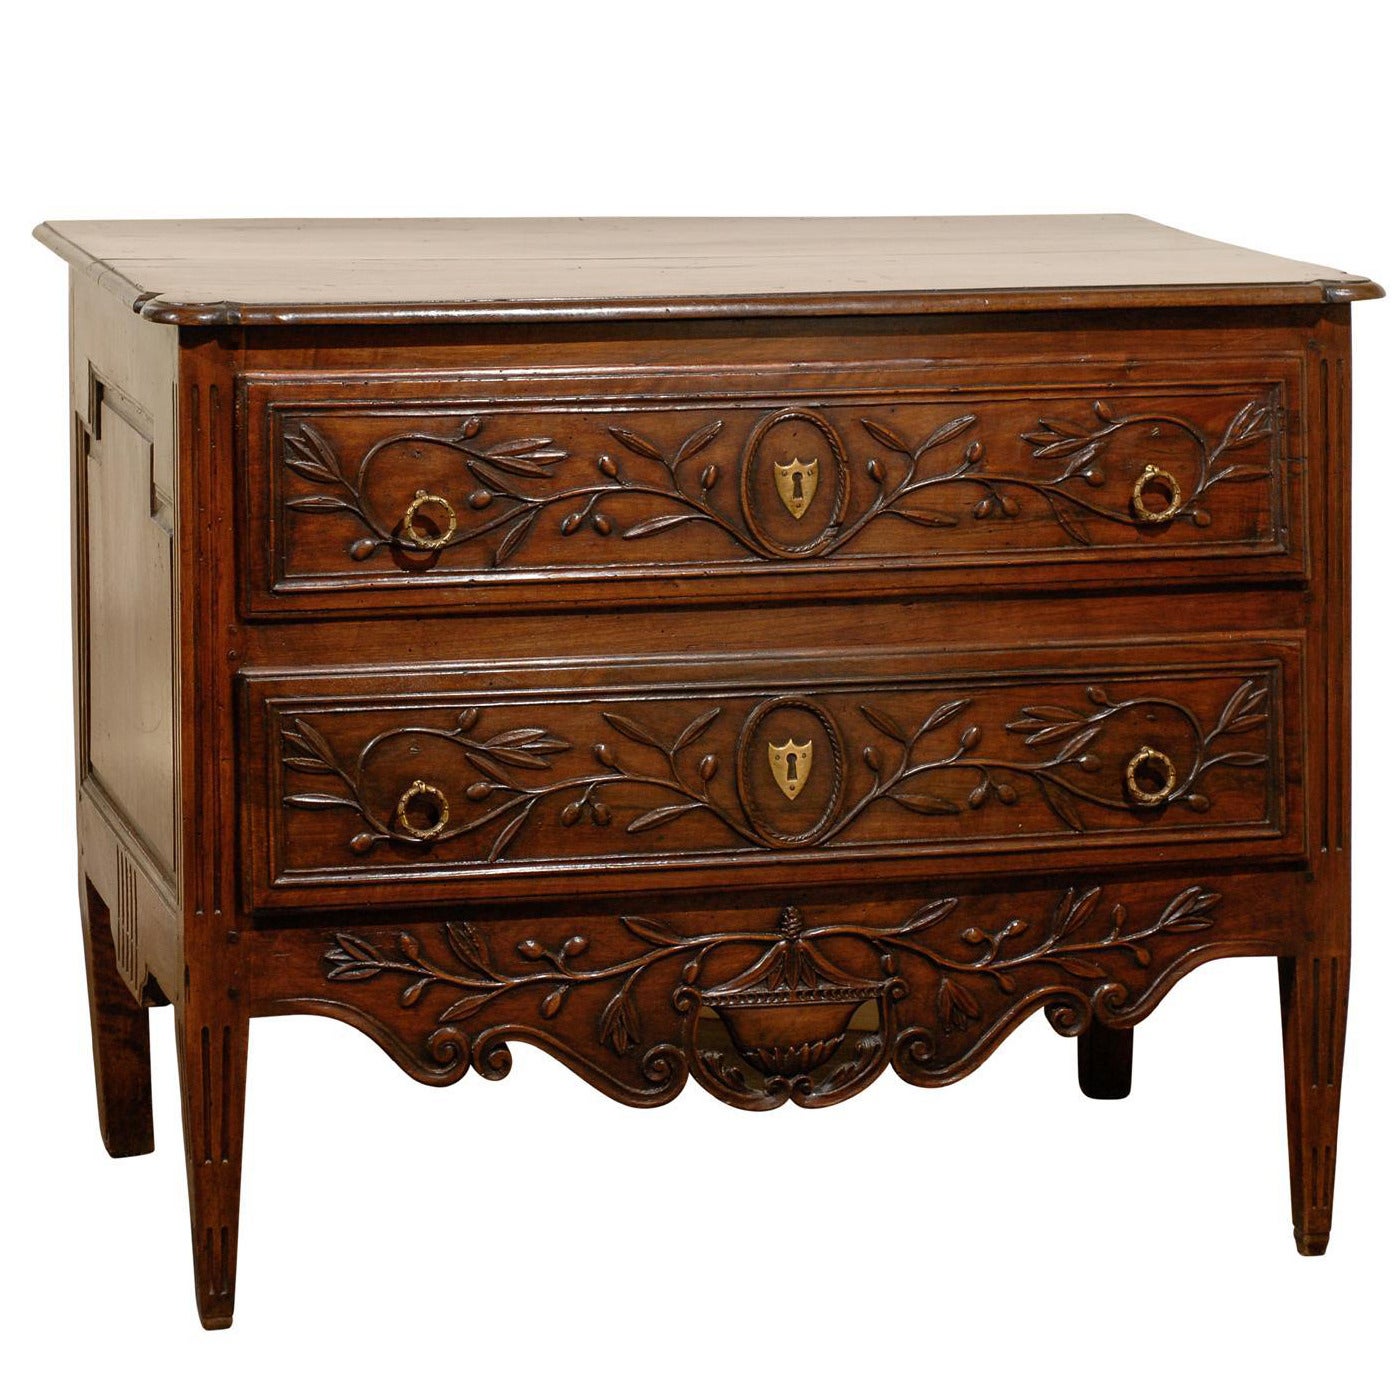 French Early 19th Century Two-Drawer Commode with Foliage Décor and Tapered Legs